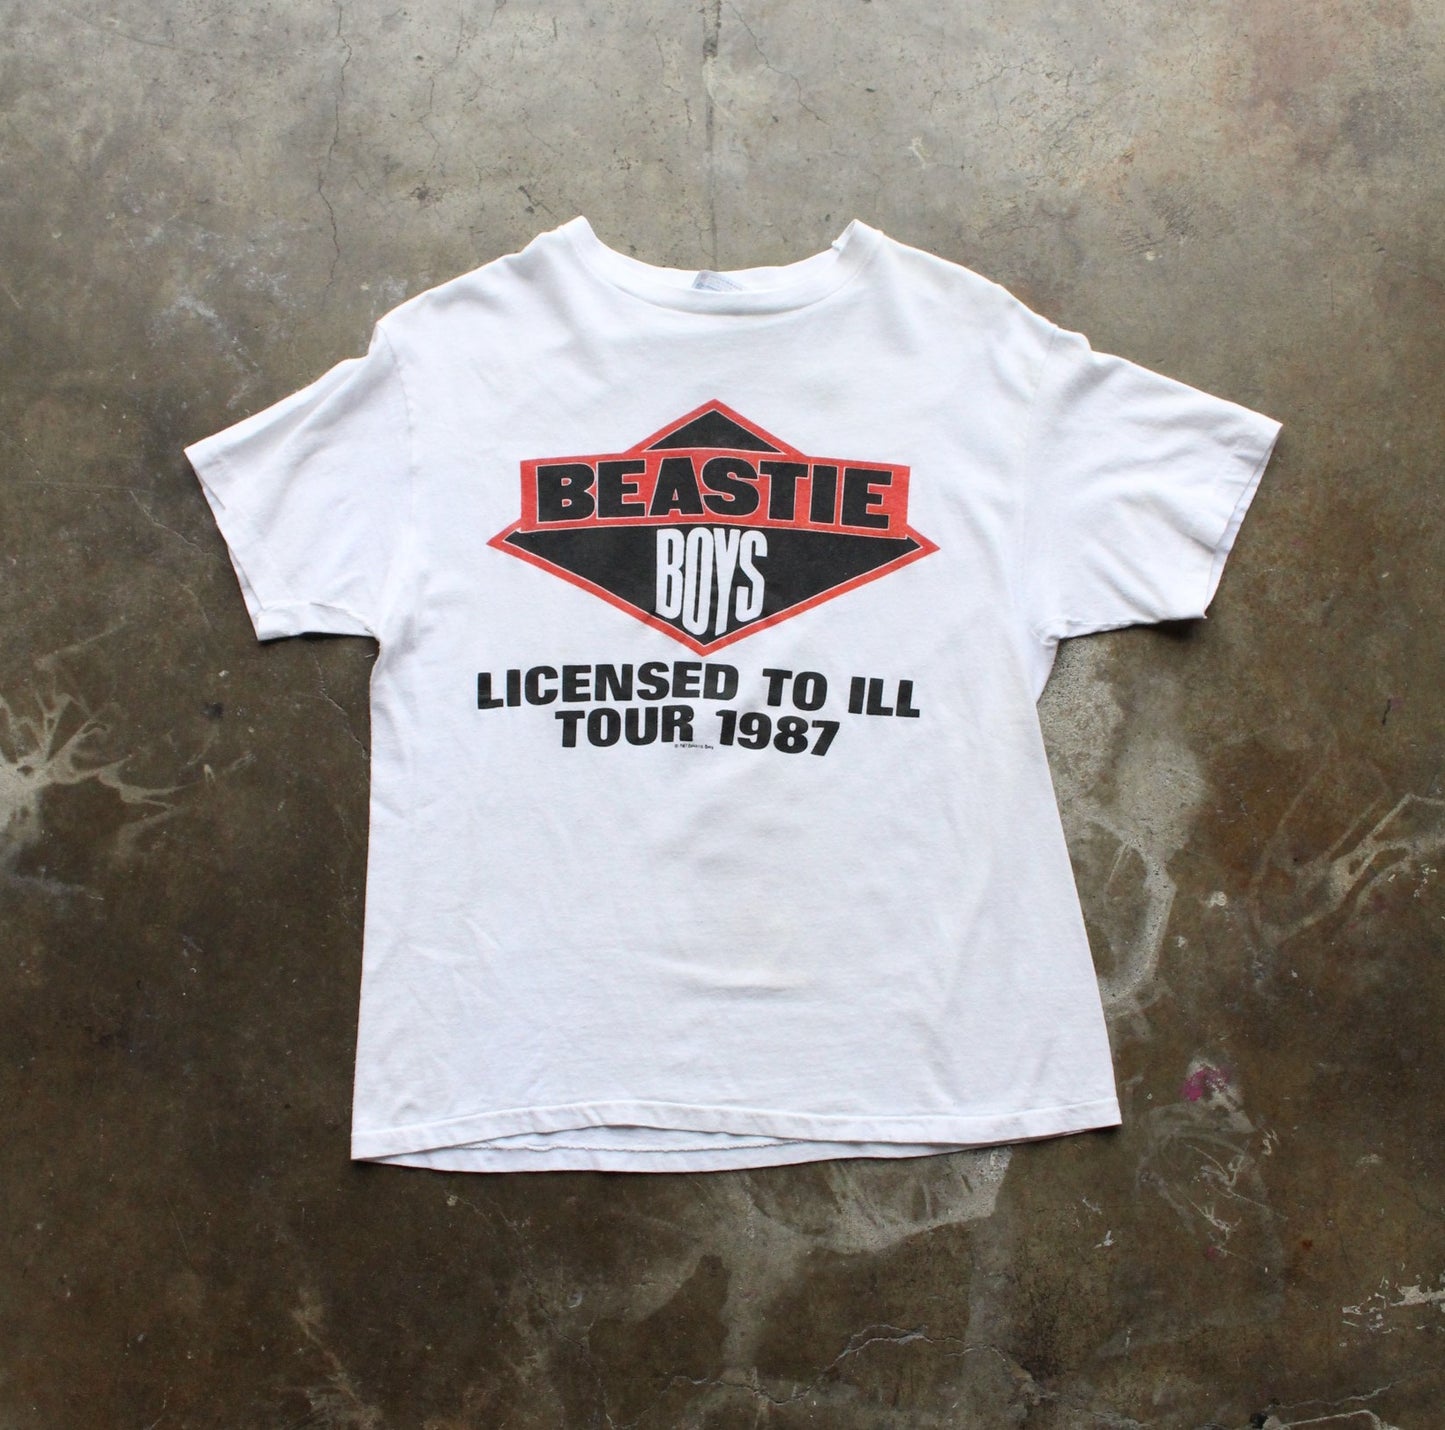 Vintage Beastie Boys Licensed to Ill Tour 1987 T-Shirt - S/M